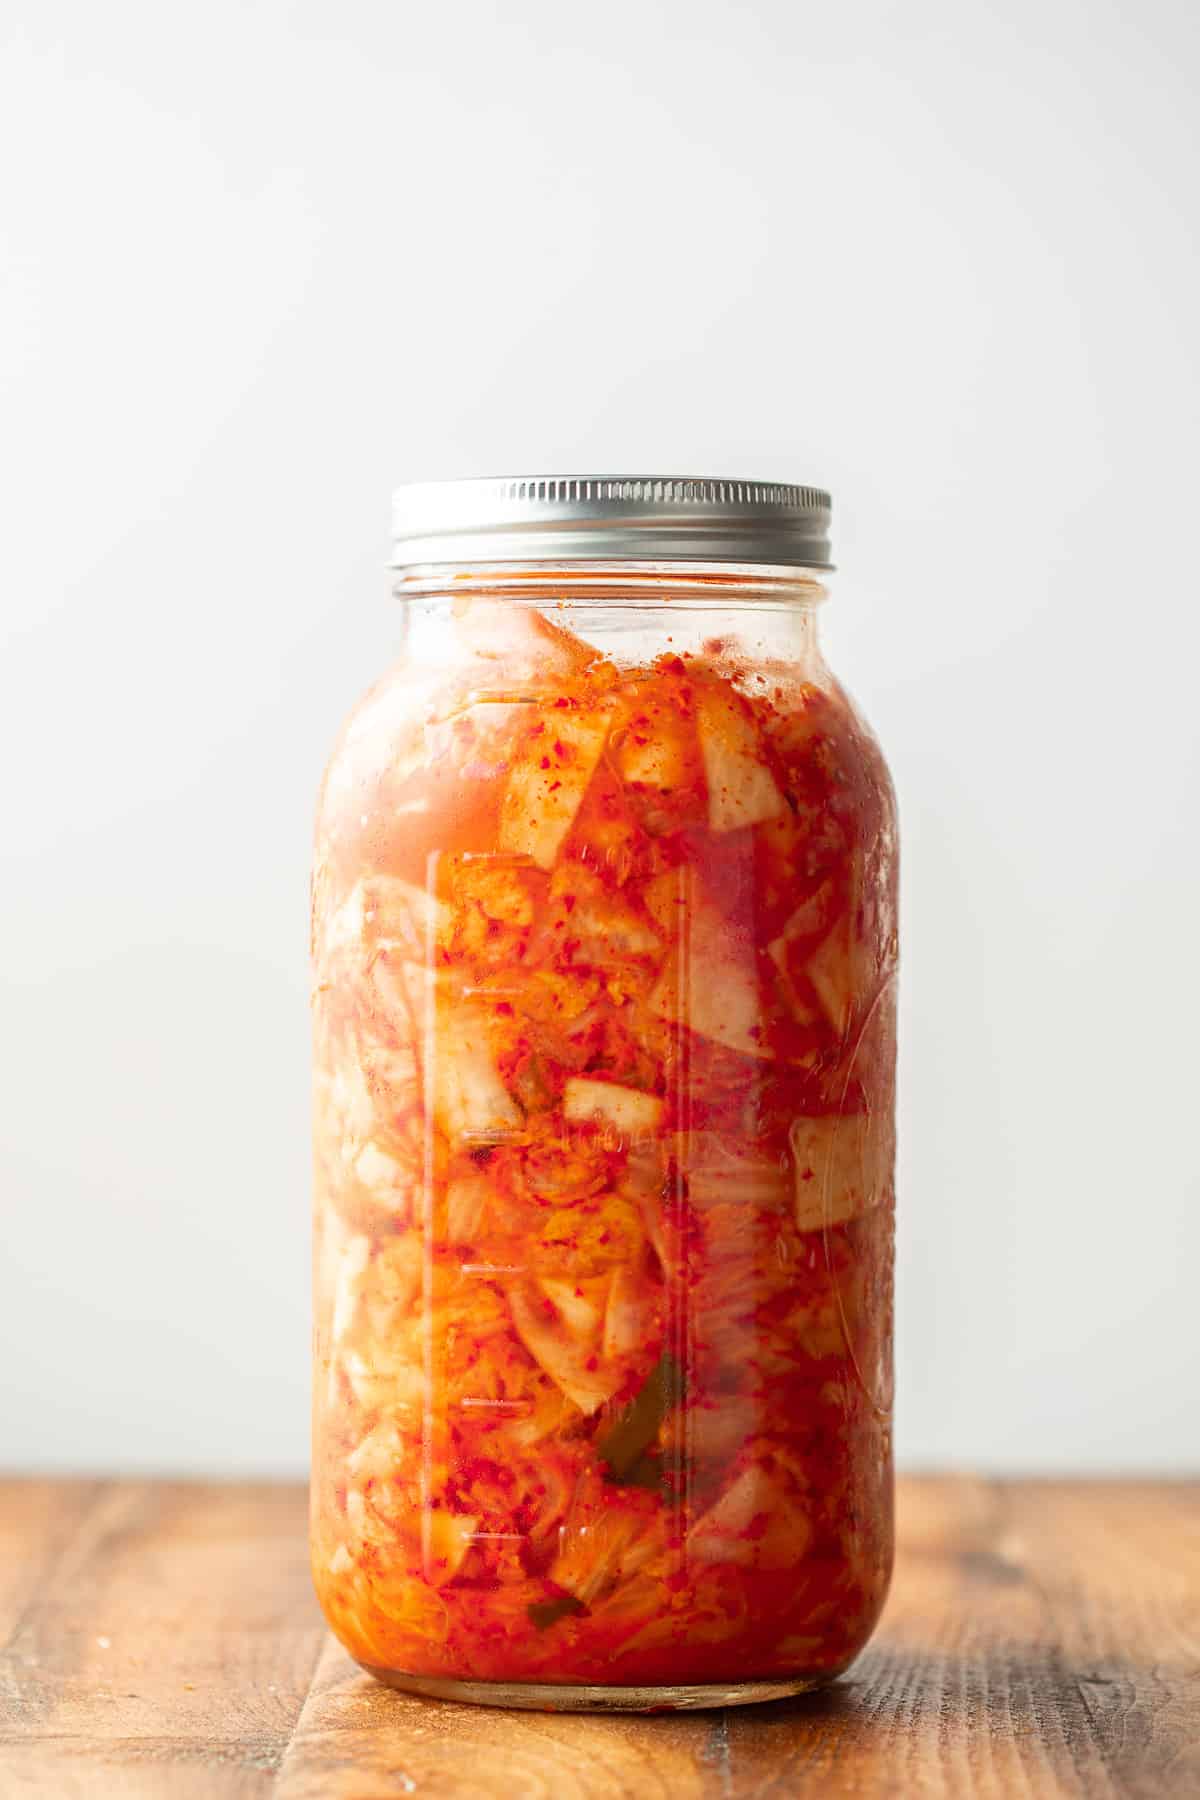 Jar of Vegan Kimchi in front of a white background.